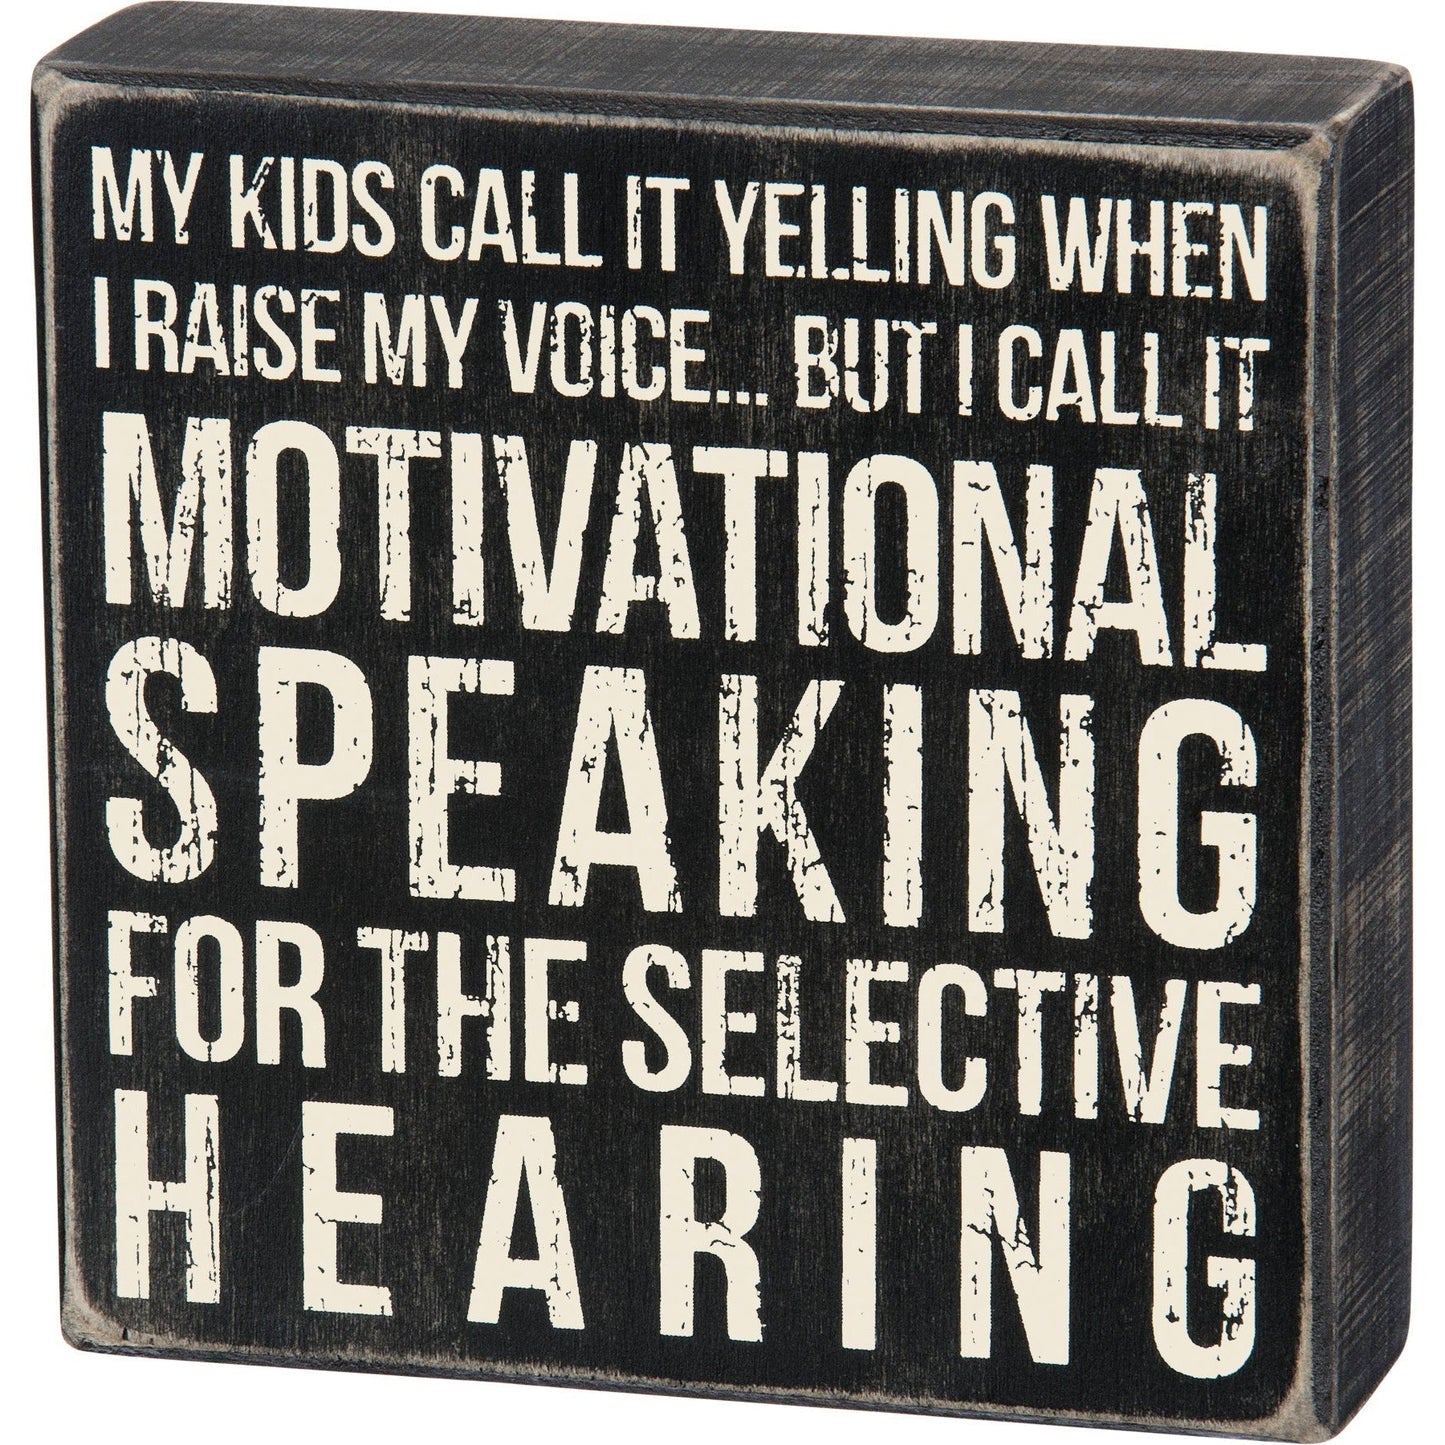 Motivational Speaking For The Selective Hearing Wooden Box Sign